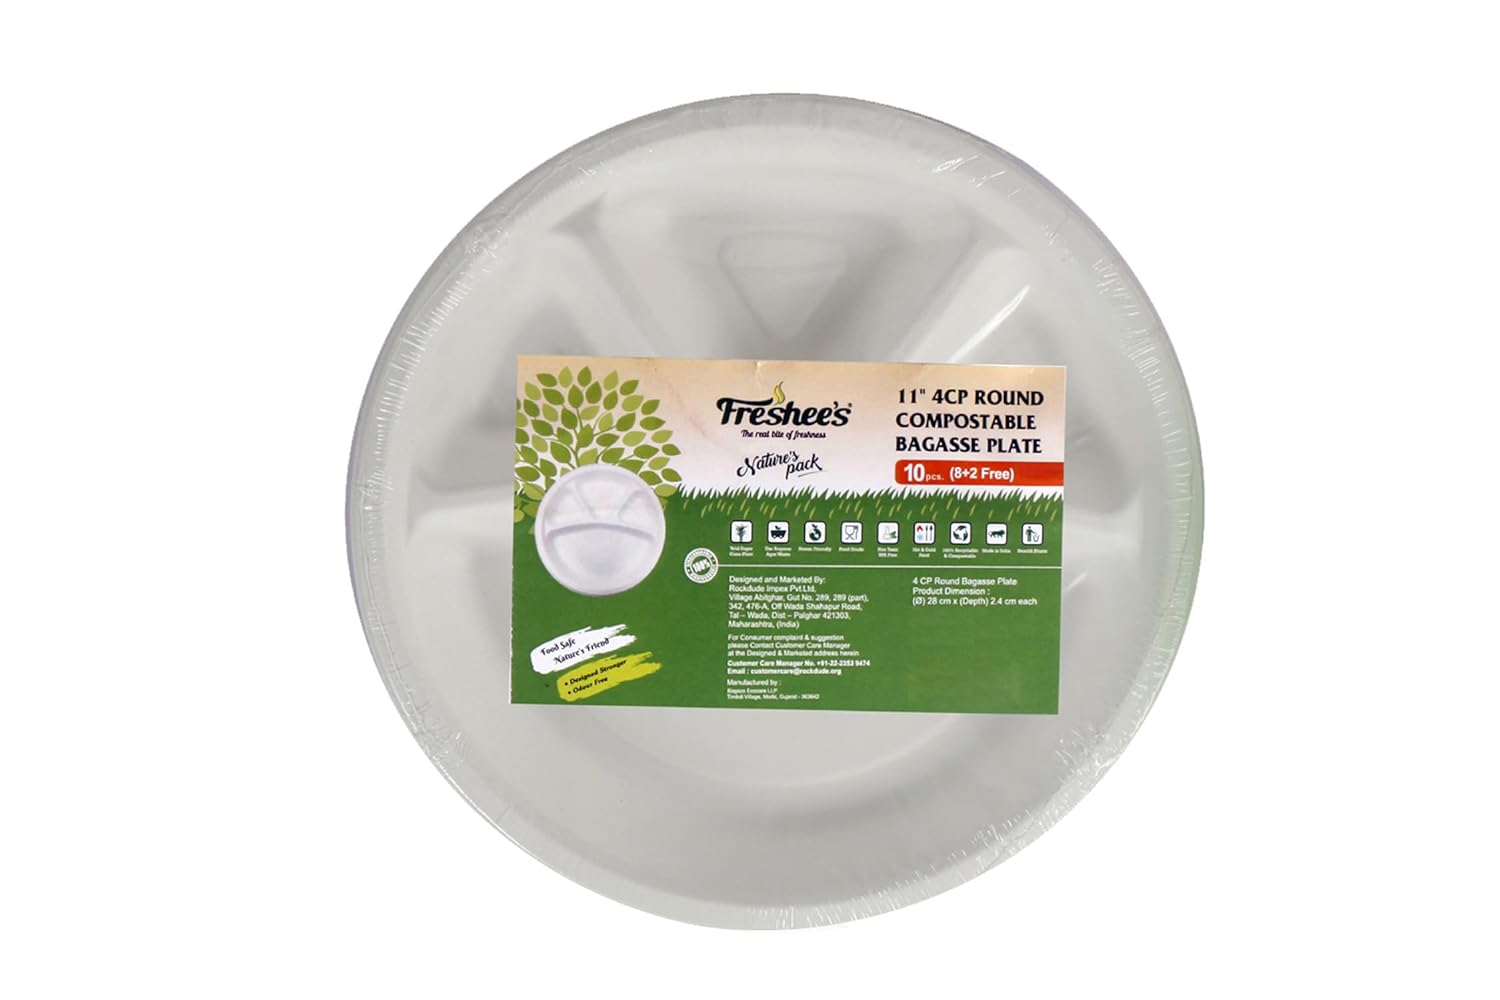 Freshee 4CP Round Compostable Bagasse plate